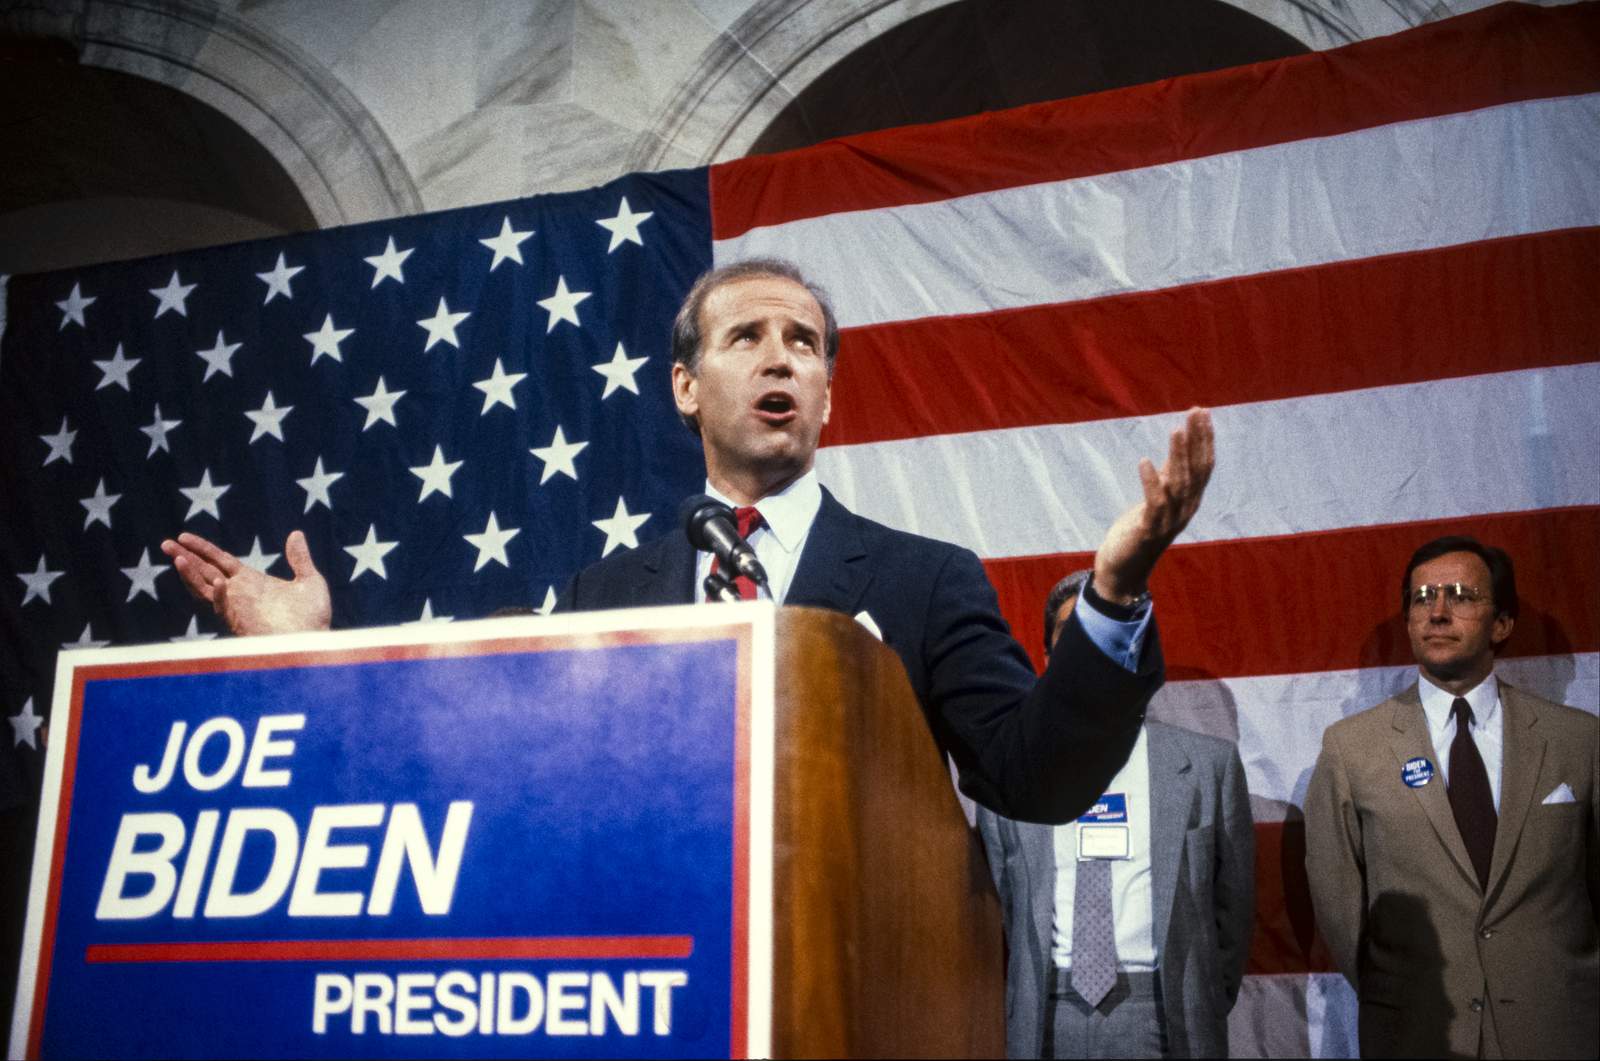 Our next president, Joe Biden, and his storied career: In photos